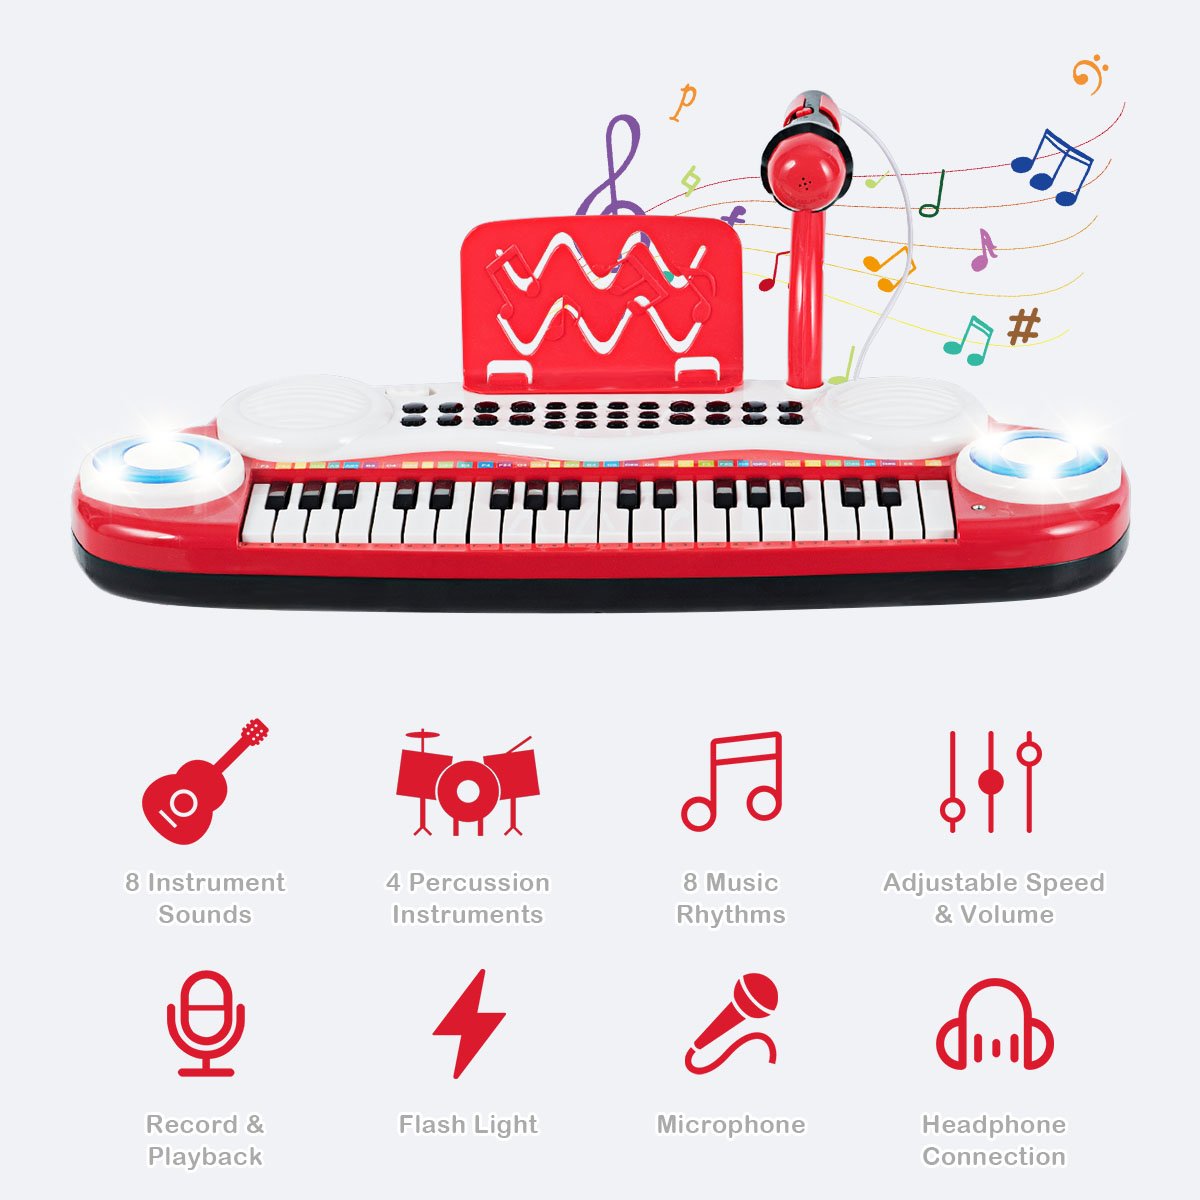 Kids Mega Mart: Your Source for Musical Fun with Red Keyboards